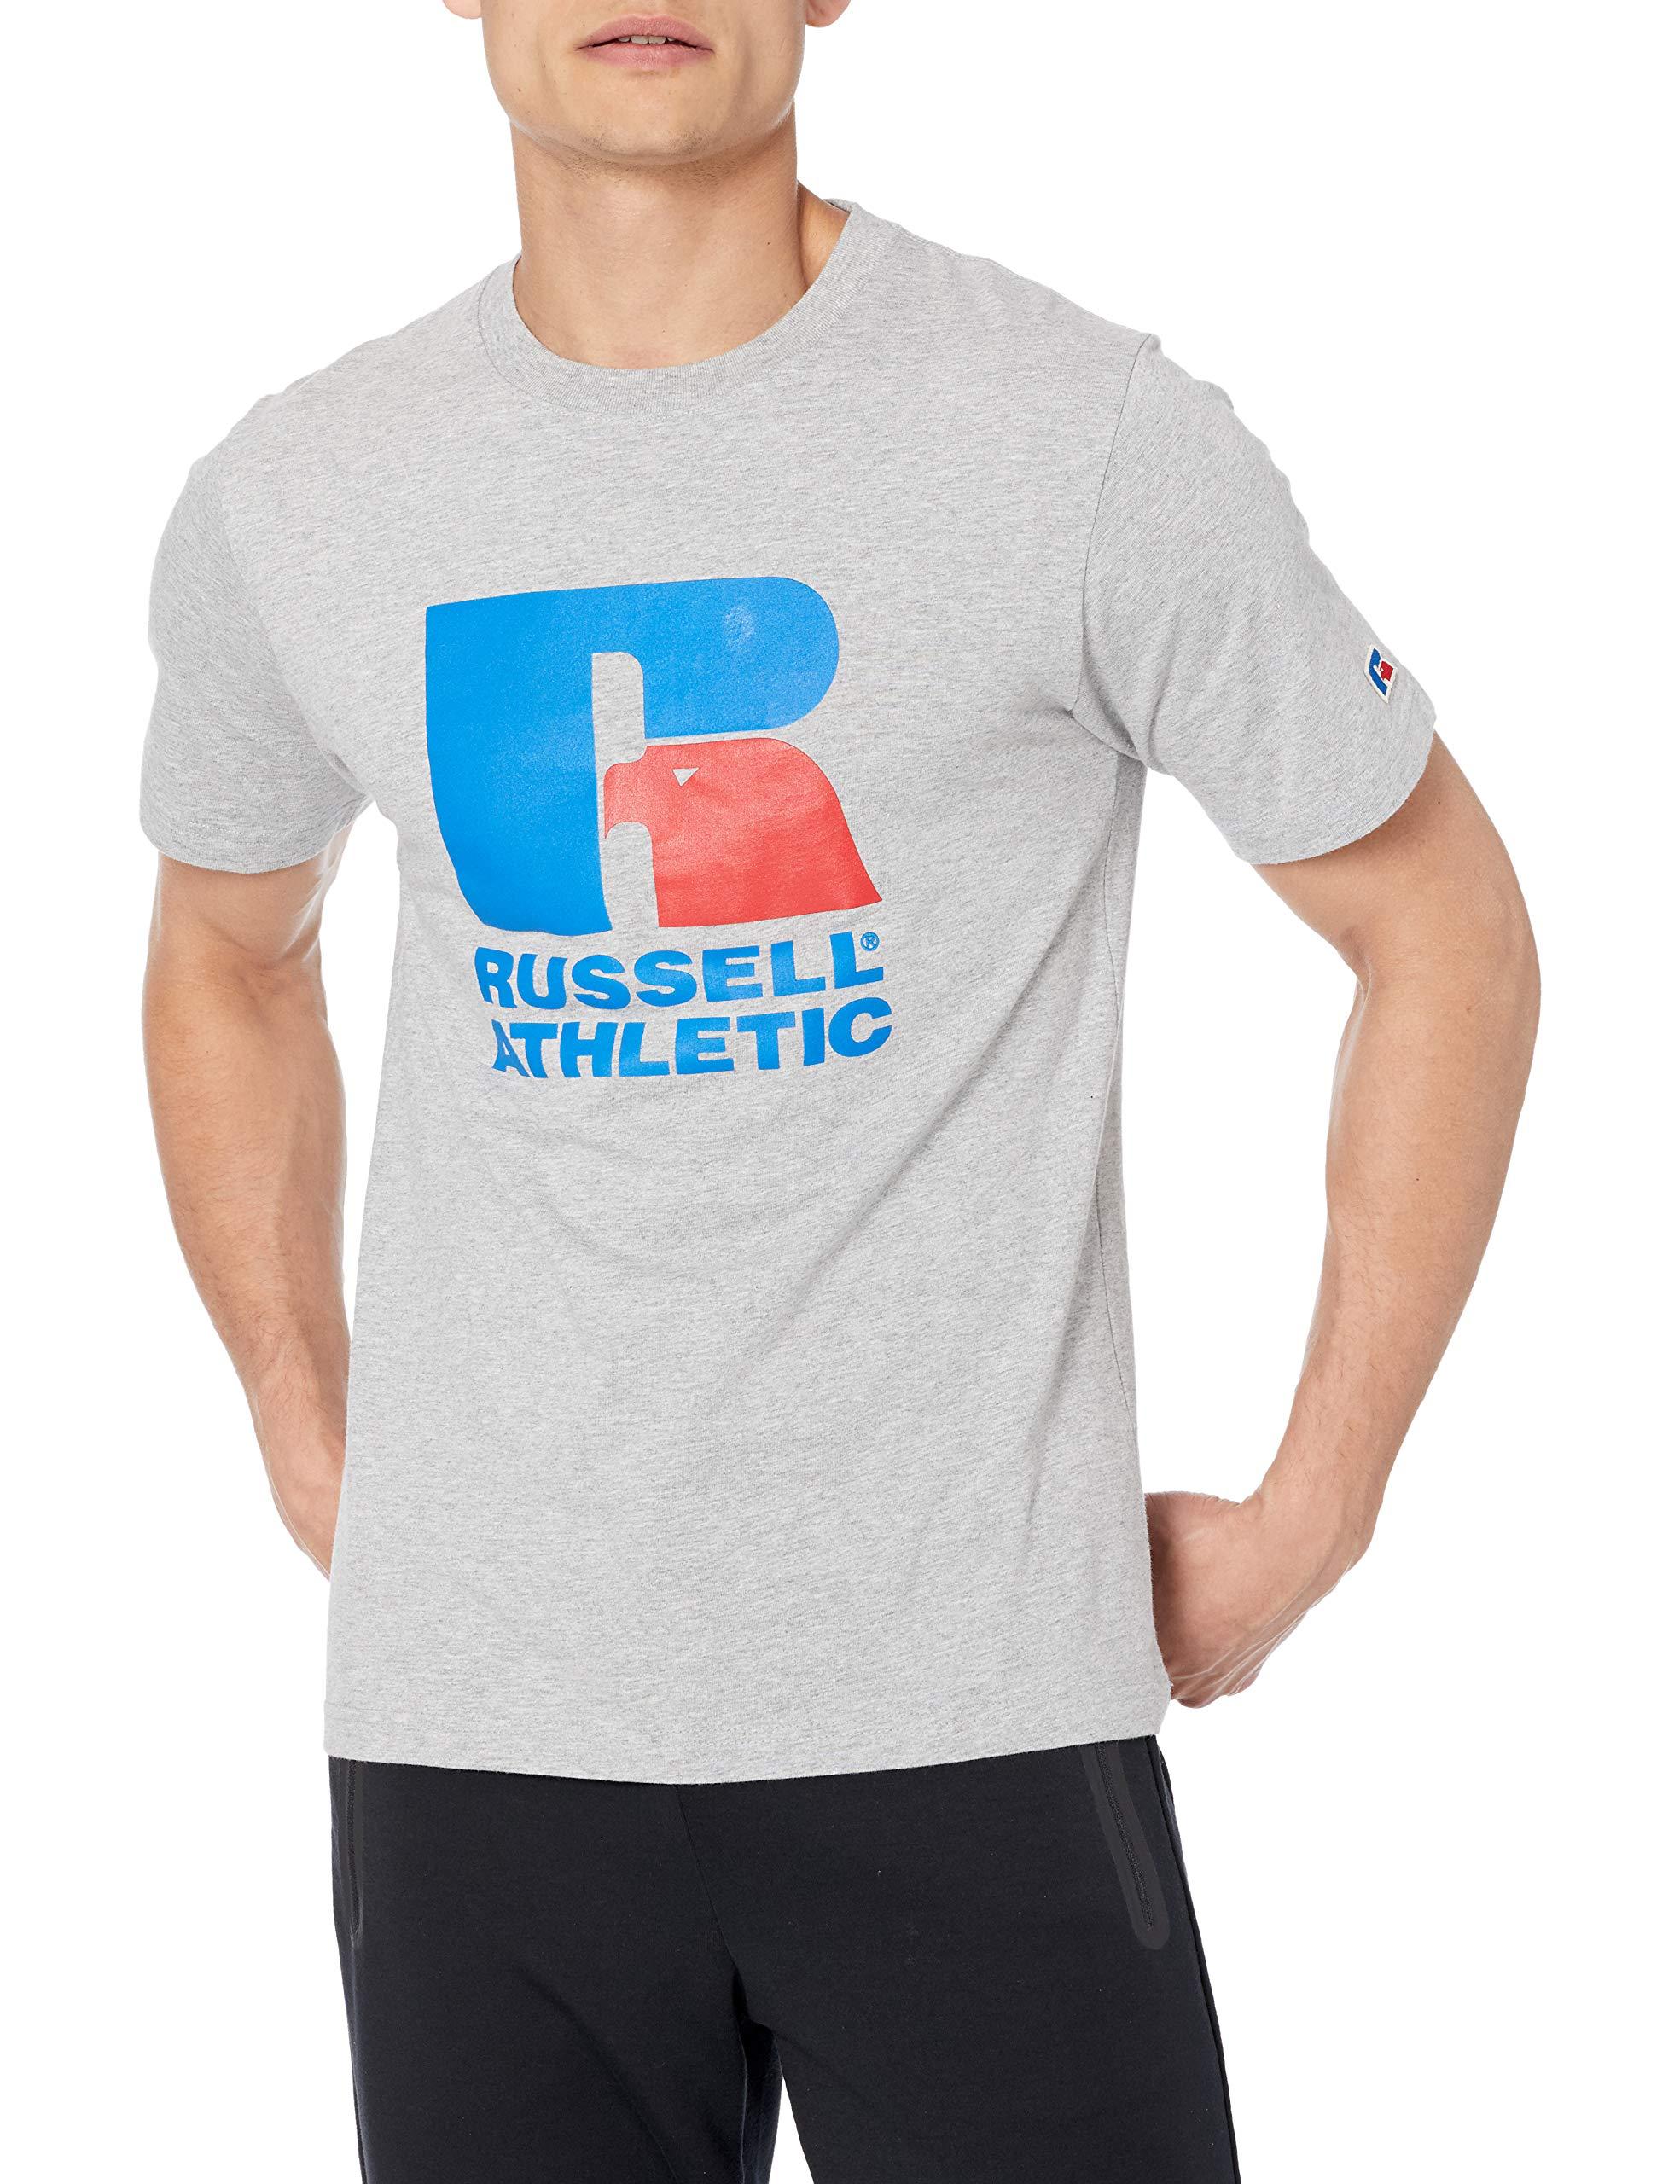 Russell Athletic Premium Cotton T-shirts in Blue for Men - Save 25% - Lyst